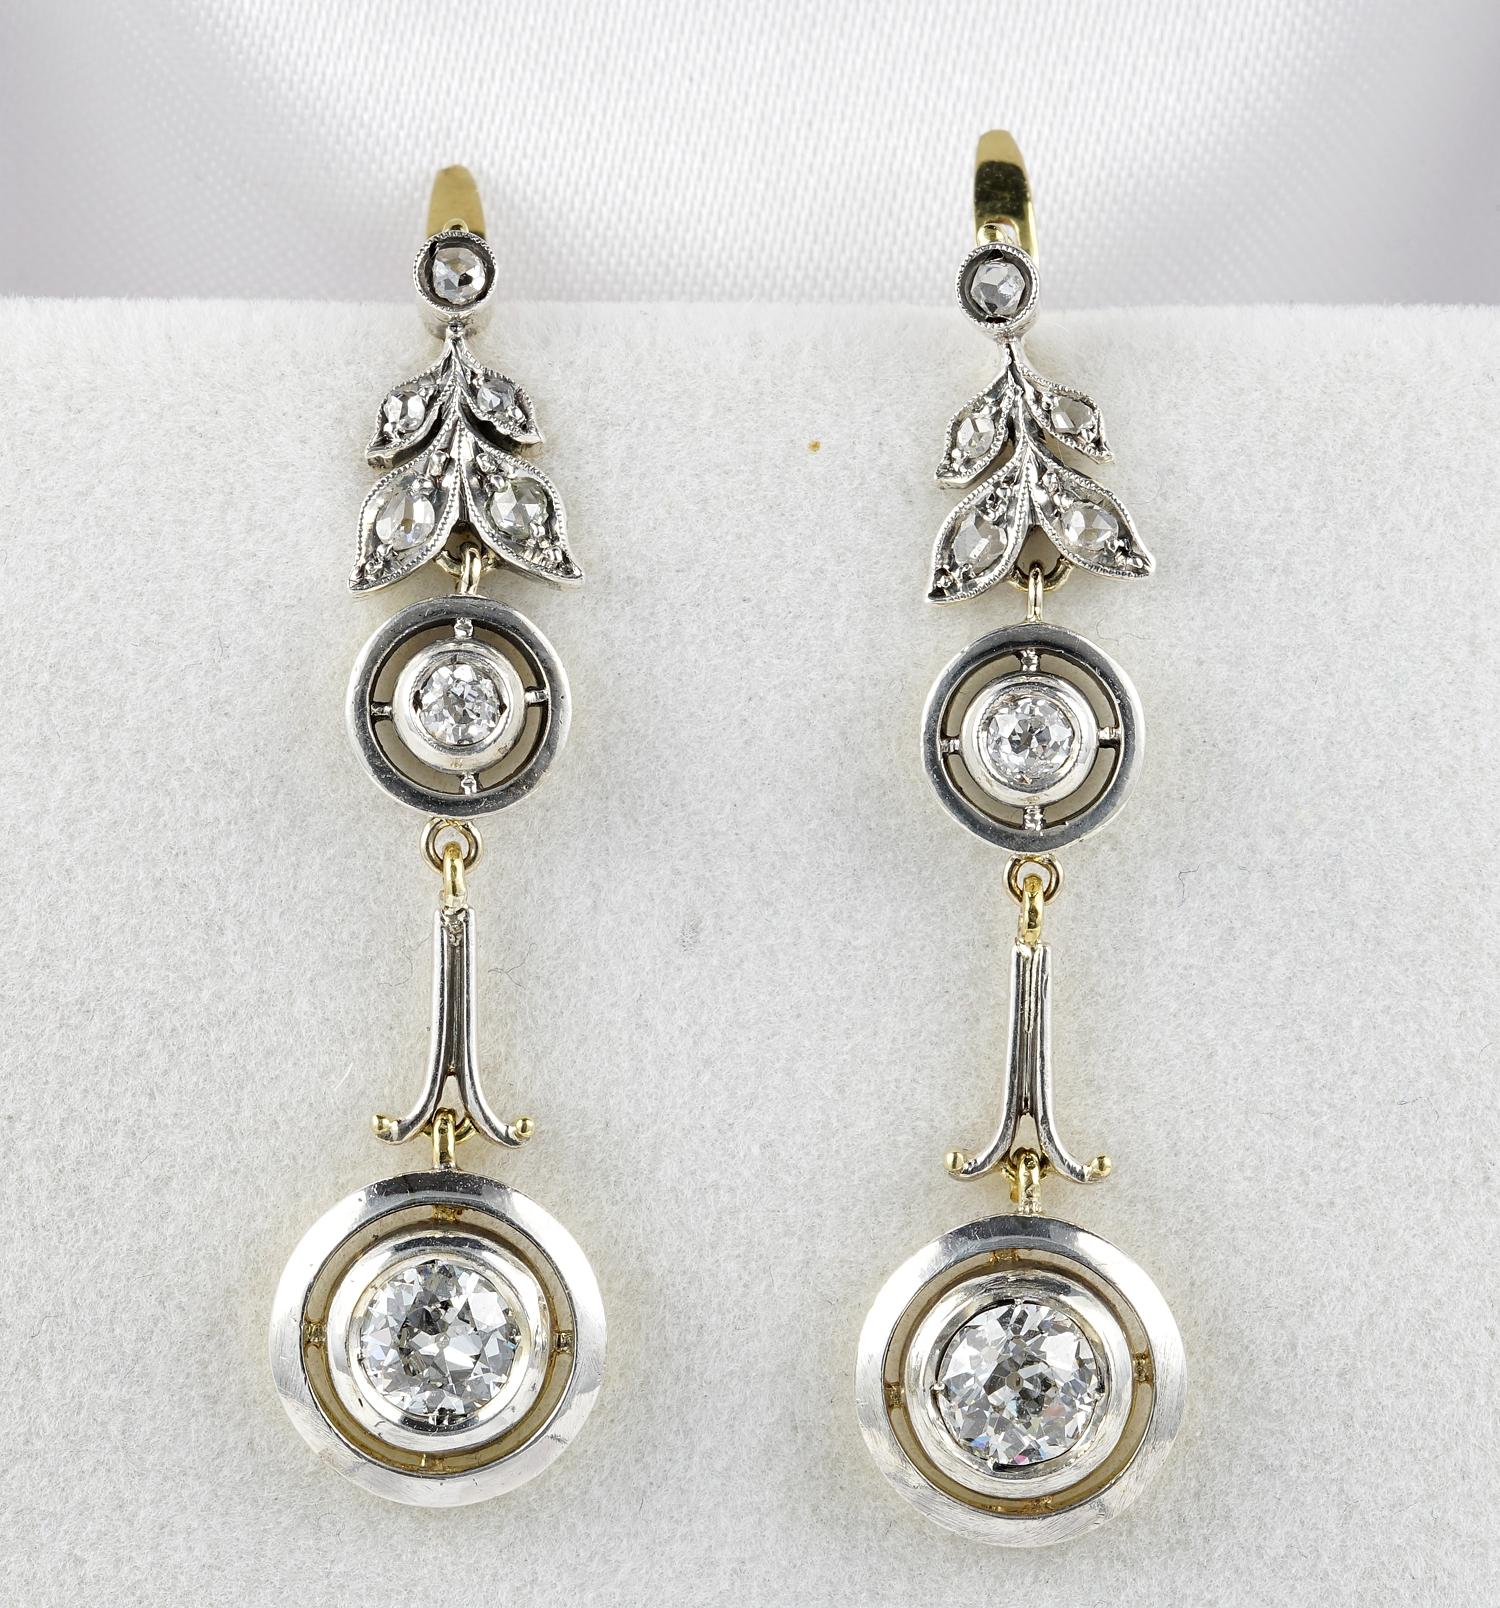 These rare and beautiful Art Nouvea drop earrings are 1900 ca
Crafted of solid 18 KT gold topped by silver
Graceful nature inspired design with a gorgeous top leaf leading to target shaped motifs, connected by a swirl bar
Larger Diamonds are two old